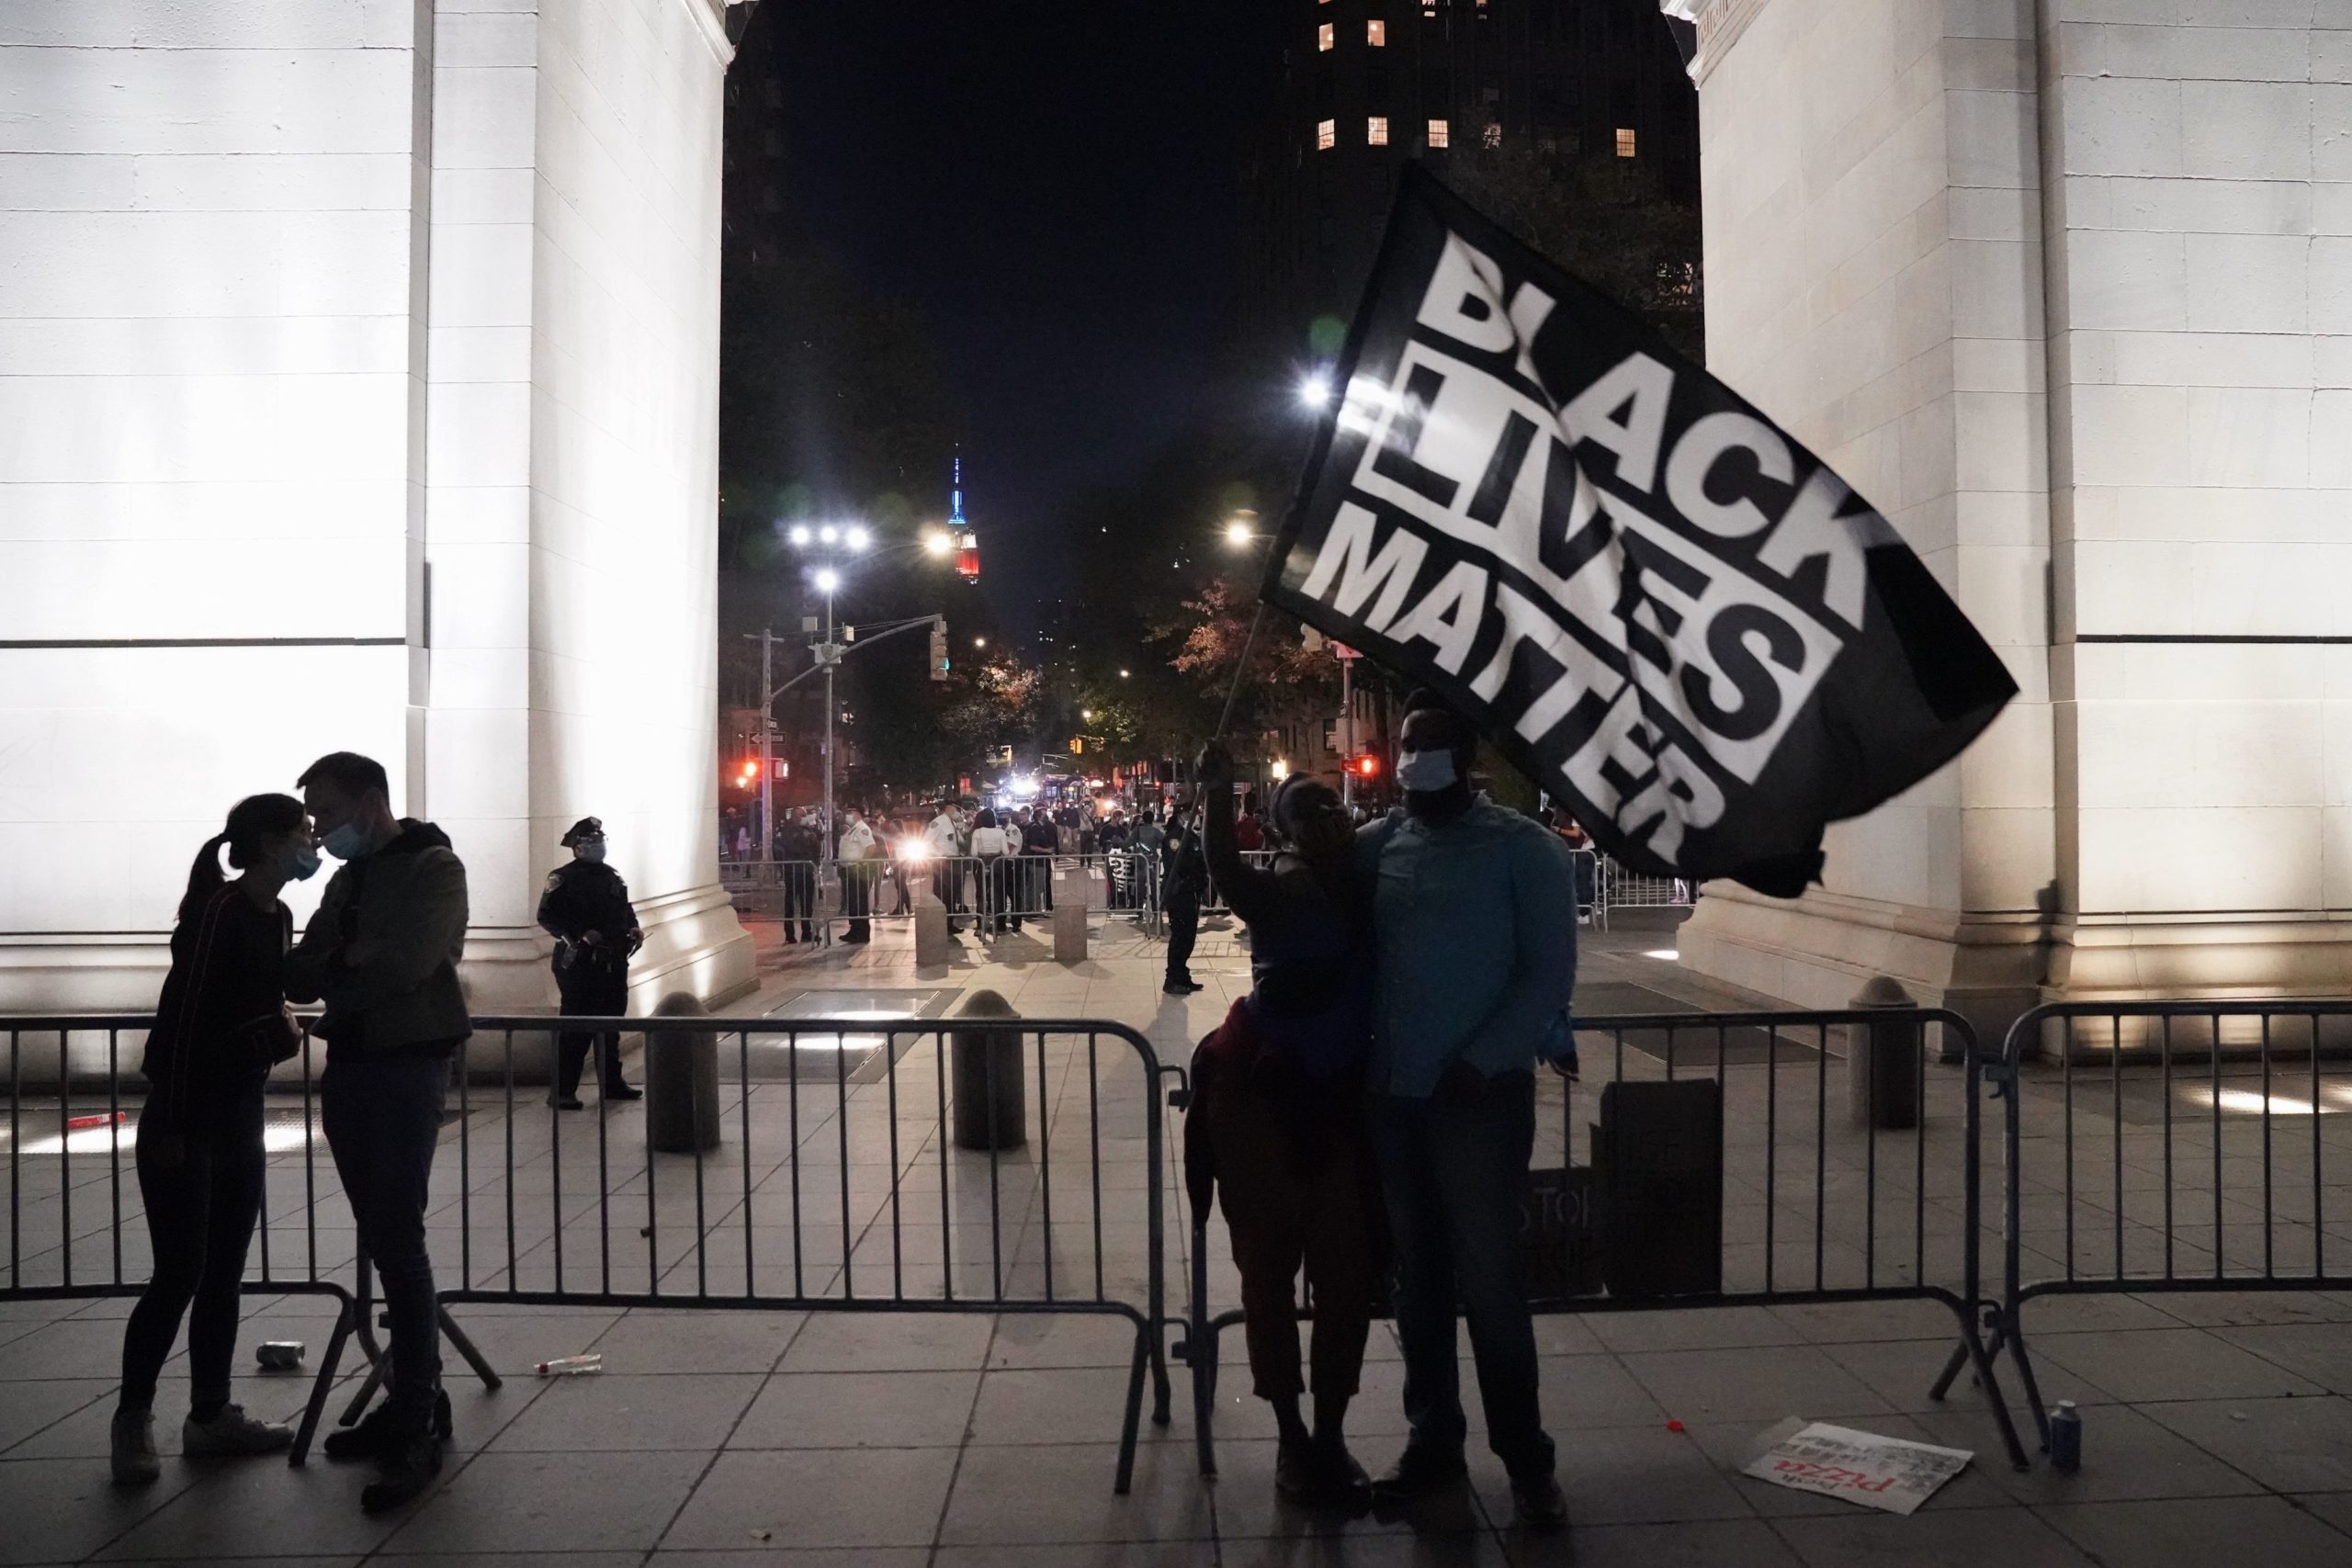 People hold a Black Lives Matter flag as they celebrate in Washington Square Park after Joe Biden was declared the next President on November 7, 2020 in New York. (BRYAN R. SMITH/AFP via Getty Images)